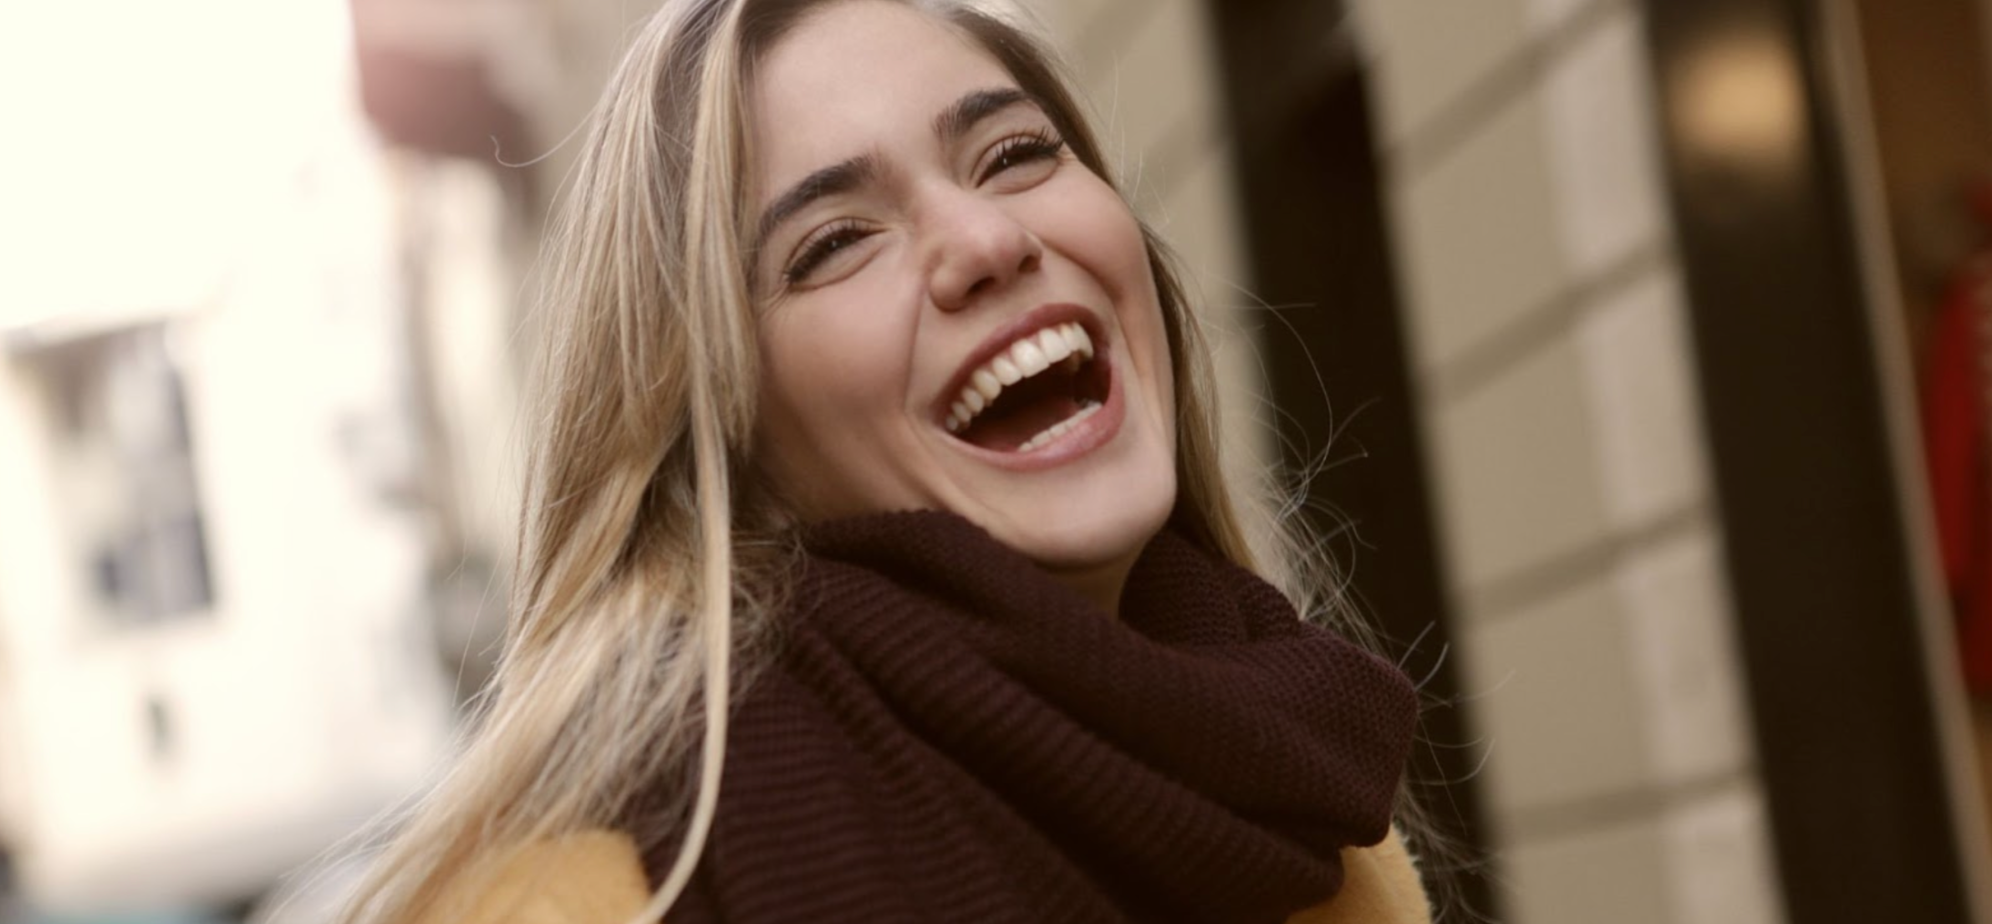 Woman laughing in winter wearing a scarf